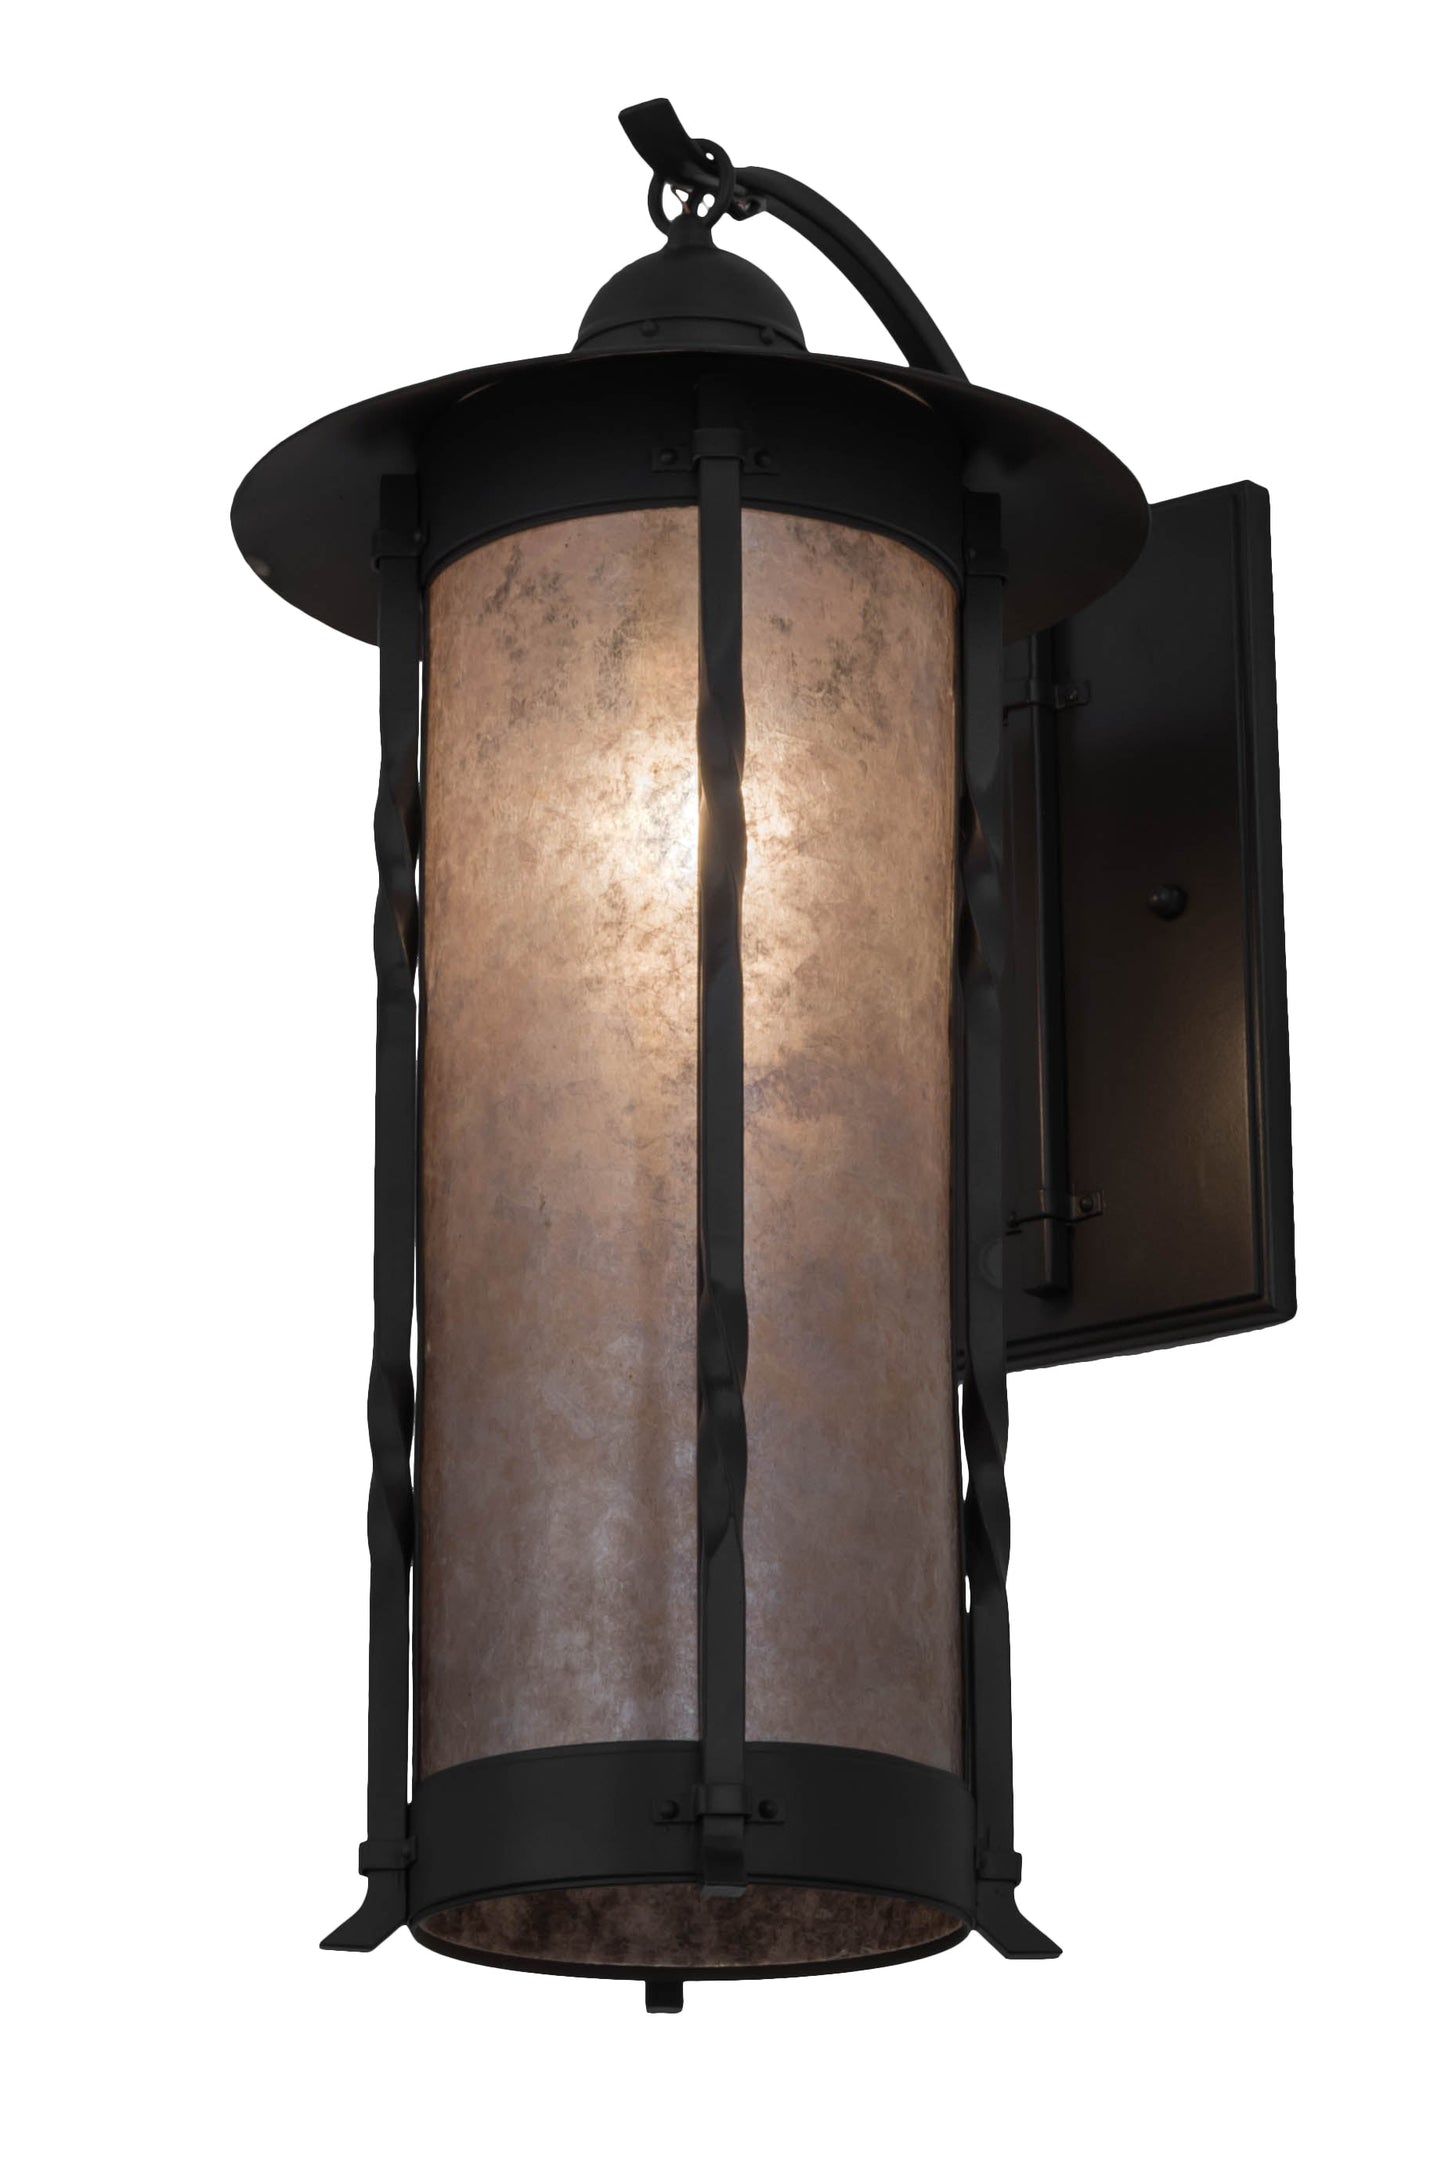 12" Dorchester Wall Sconce by 2nd Ave Lighting